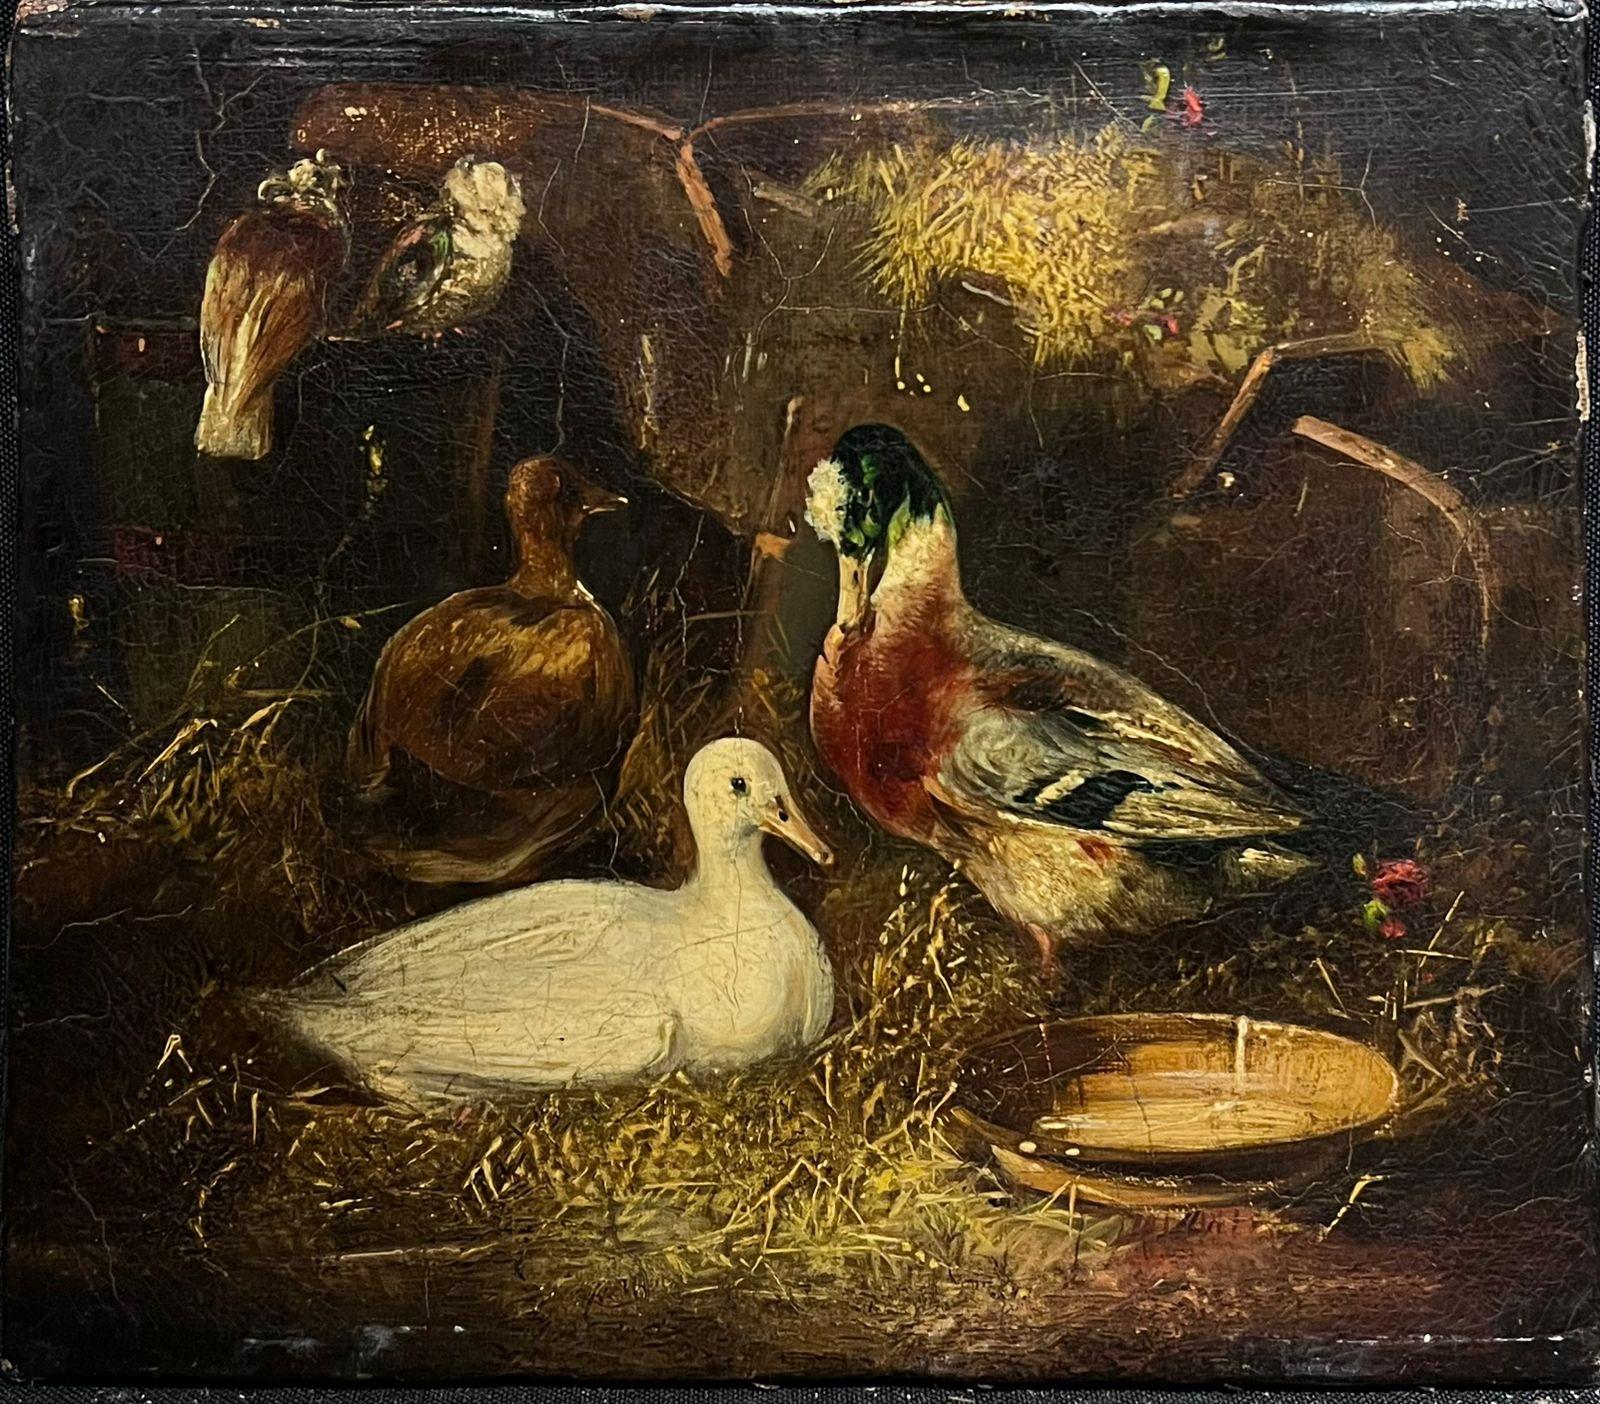 Farm yard Friends
English artist, mid 19th century
circle of John Frederick Herring Snr (1795-1865)
bears signature verso
oil on canvas, unframed
canvas: 7 x 8 inches
provenance: private collection
condition: overall good and sound condition 